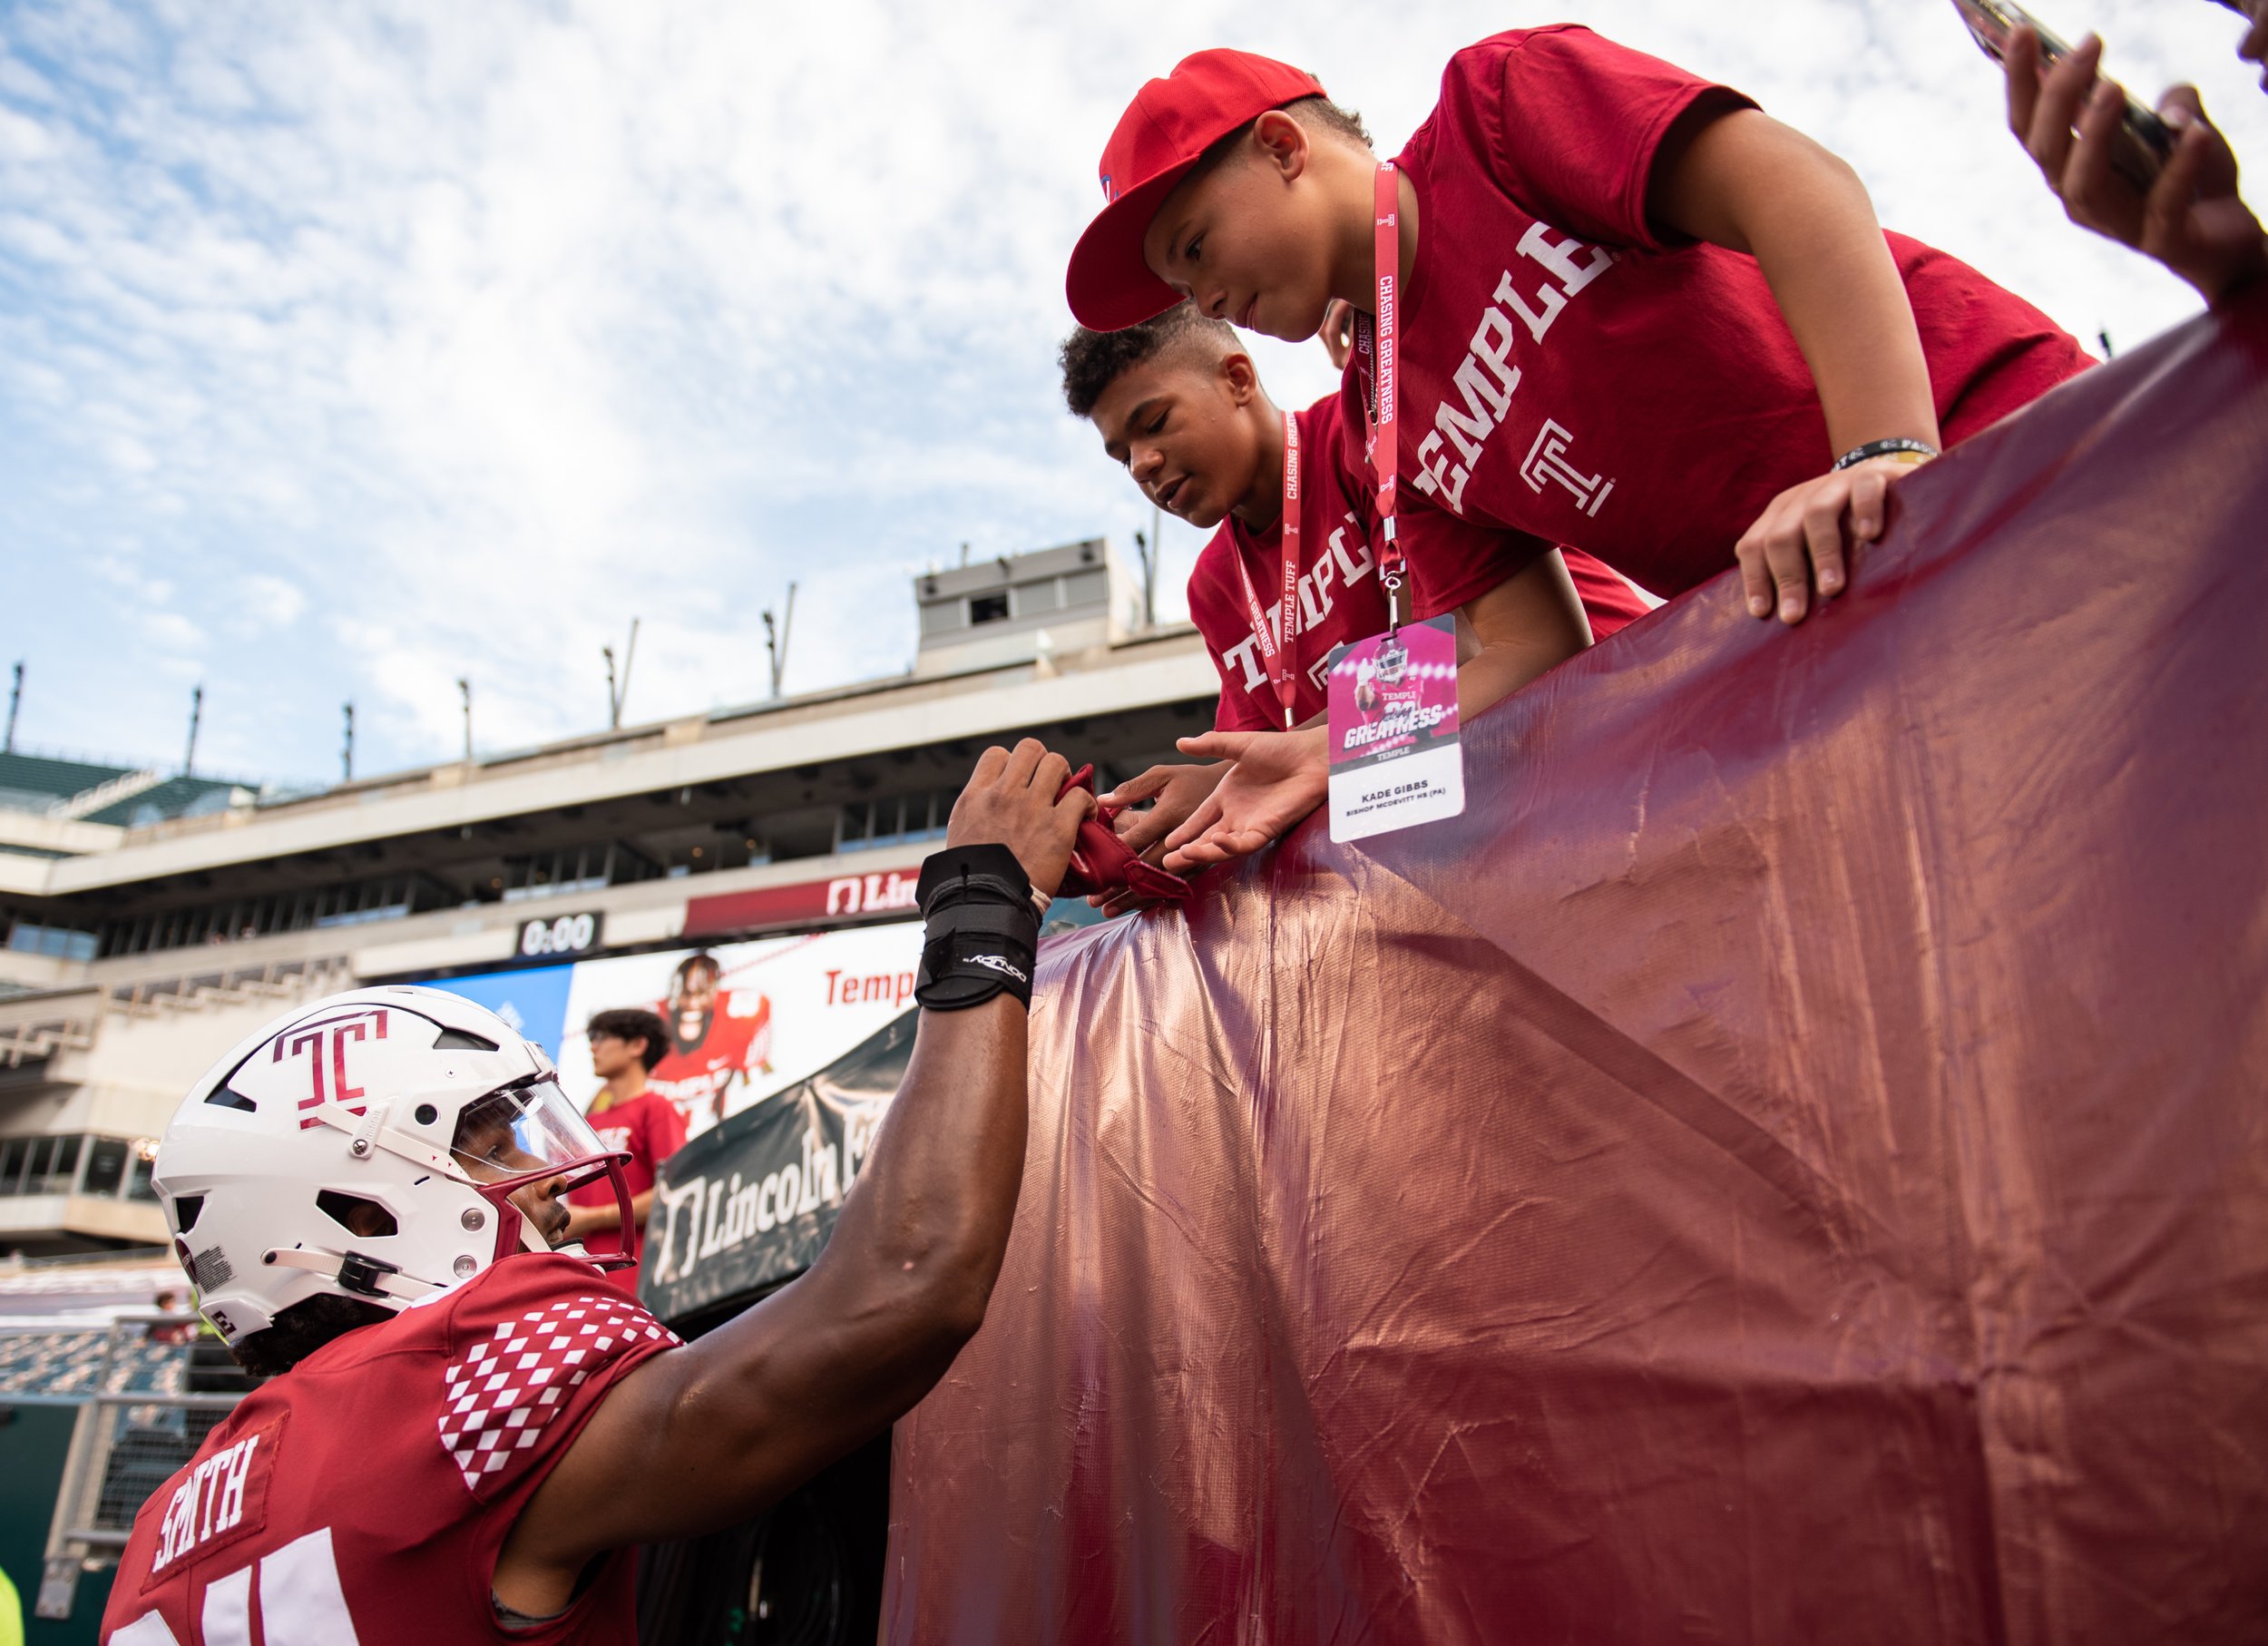   Jordan Smith, tight end for the Temple Owls, hands his gloves to fans after the game against Lafayette College on Saturday, Sept. 10, 2022. The Temple Owls won 30-14.   